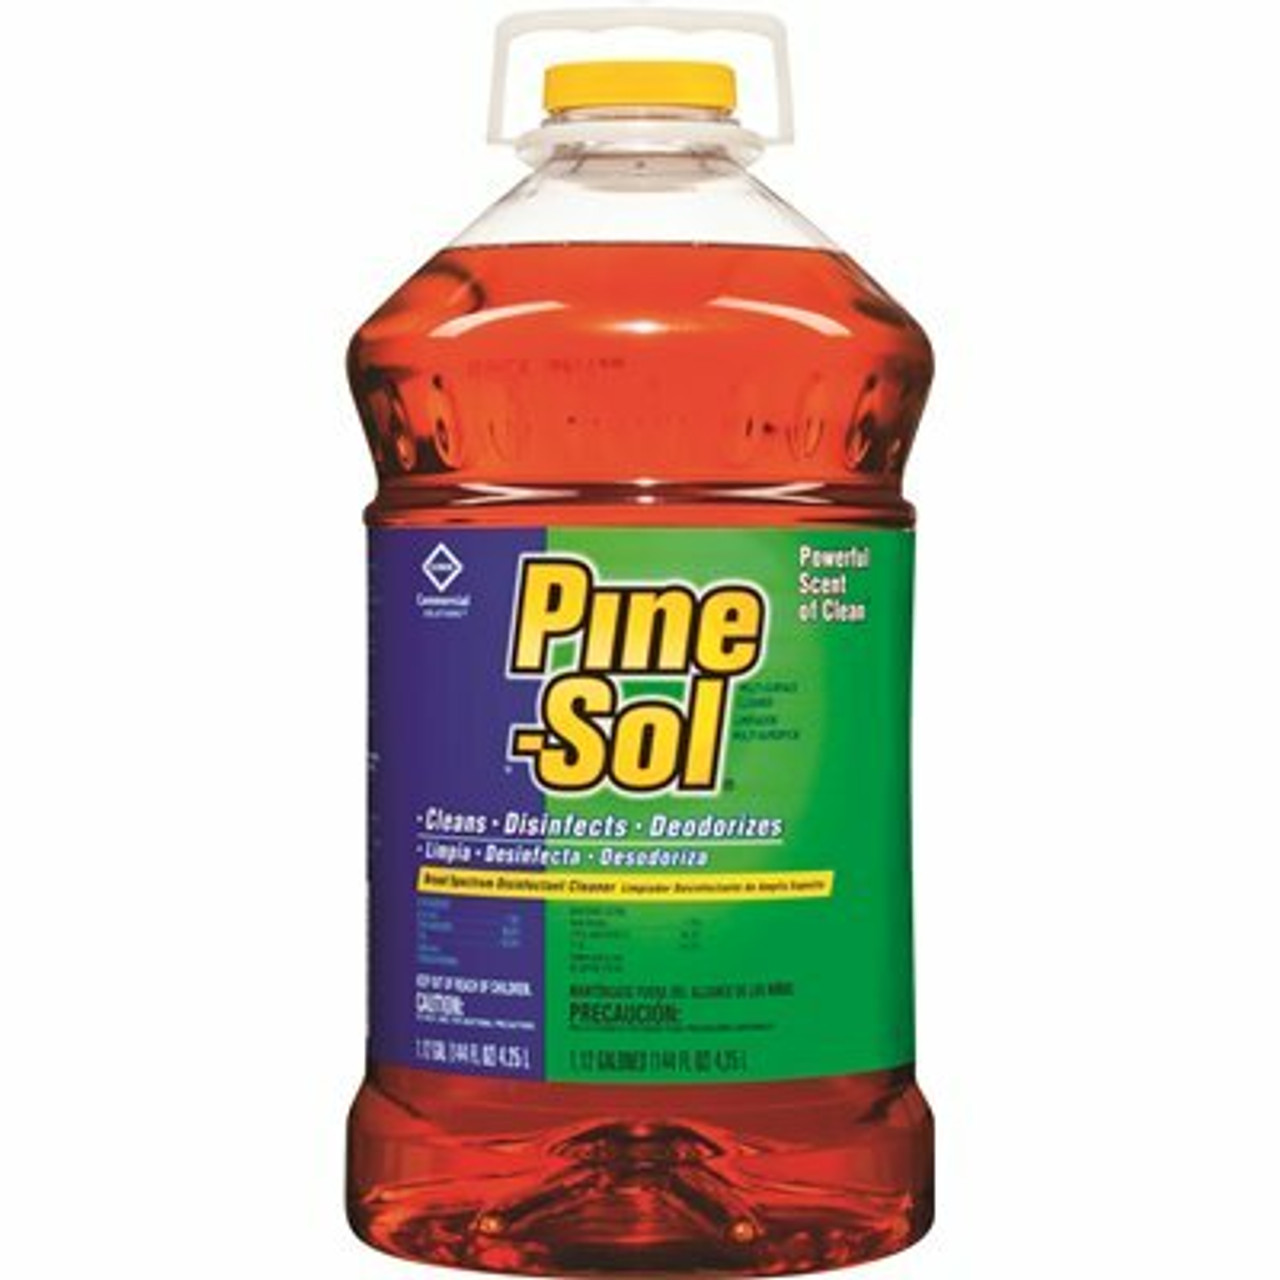 Pine-Sol 144 Oz. Multi-Surface Cleaner